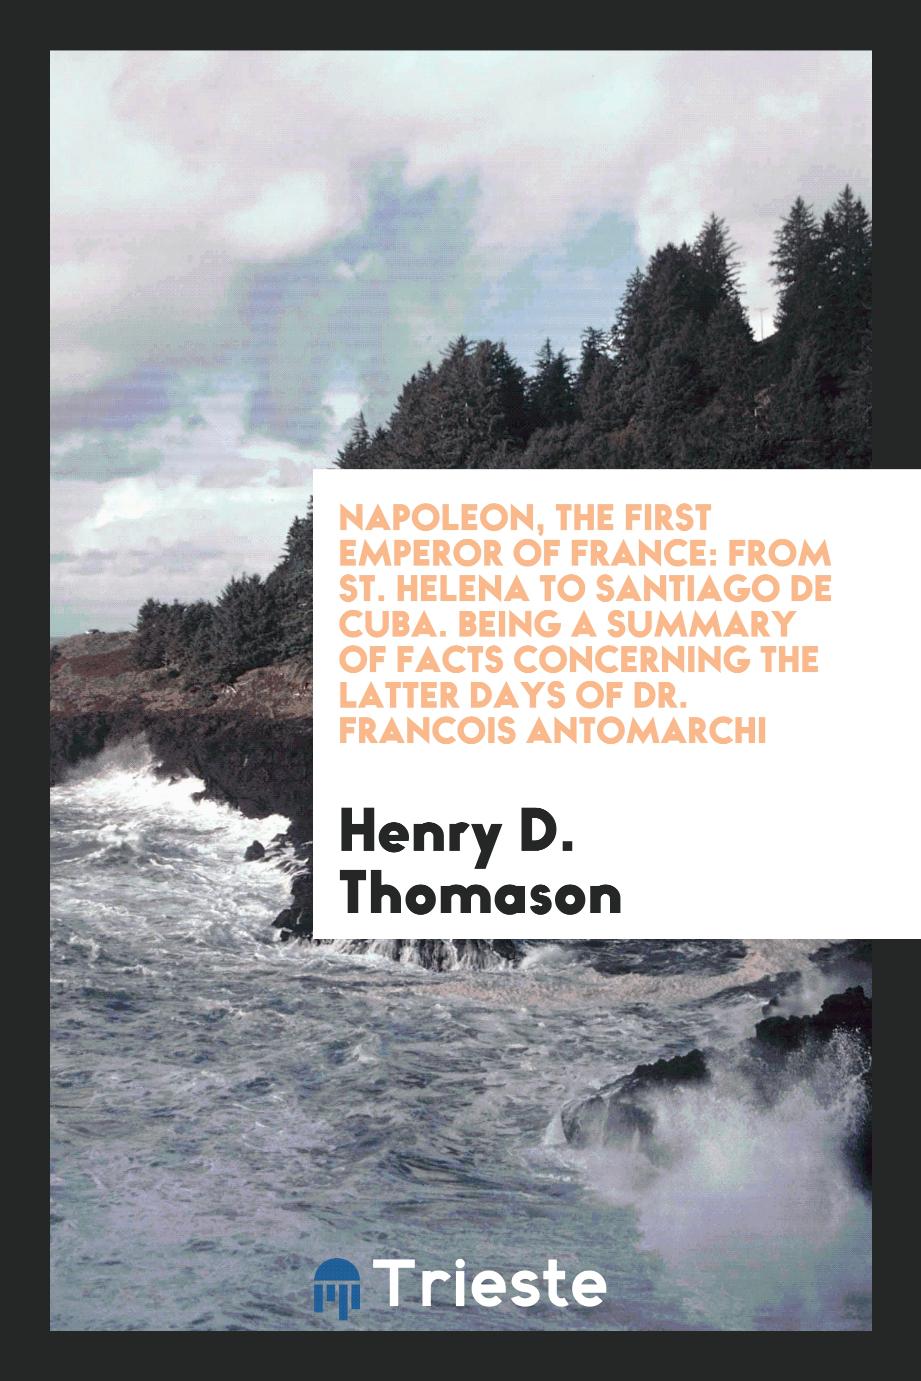 Napoleon, the First Emperor of France: From St. Helena to Santiago de Cuba. Being a Summary of facts concerning the latter days of Dr. Francois Antomarchi